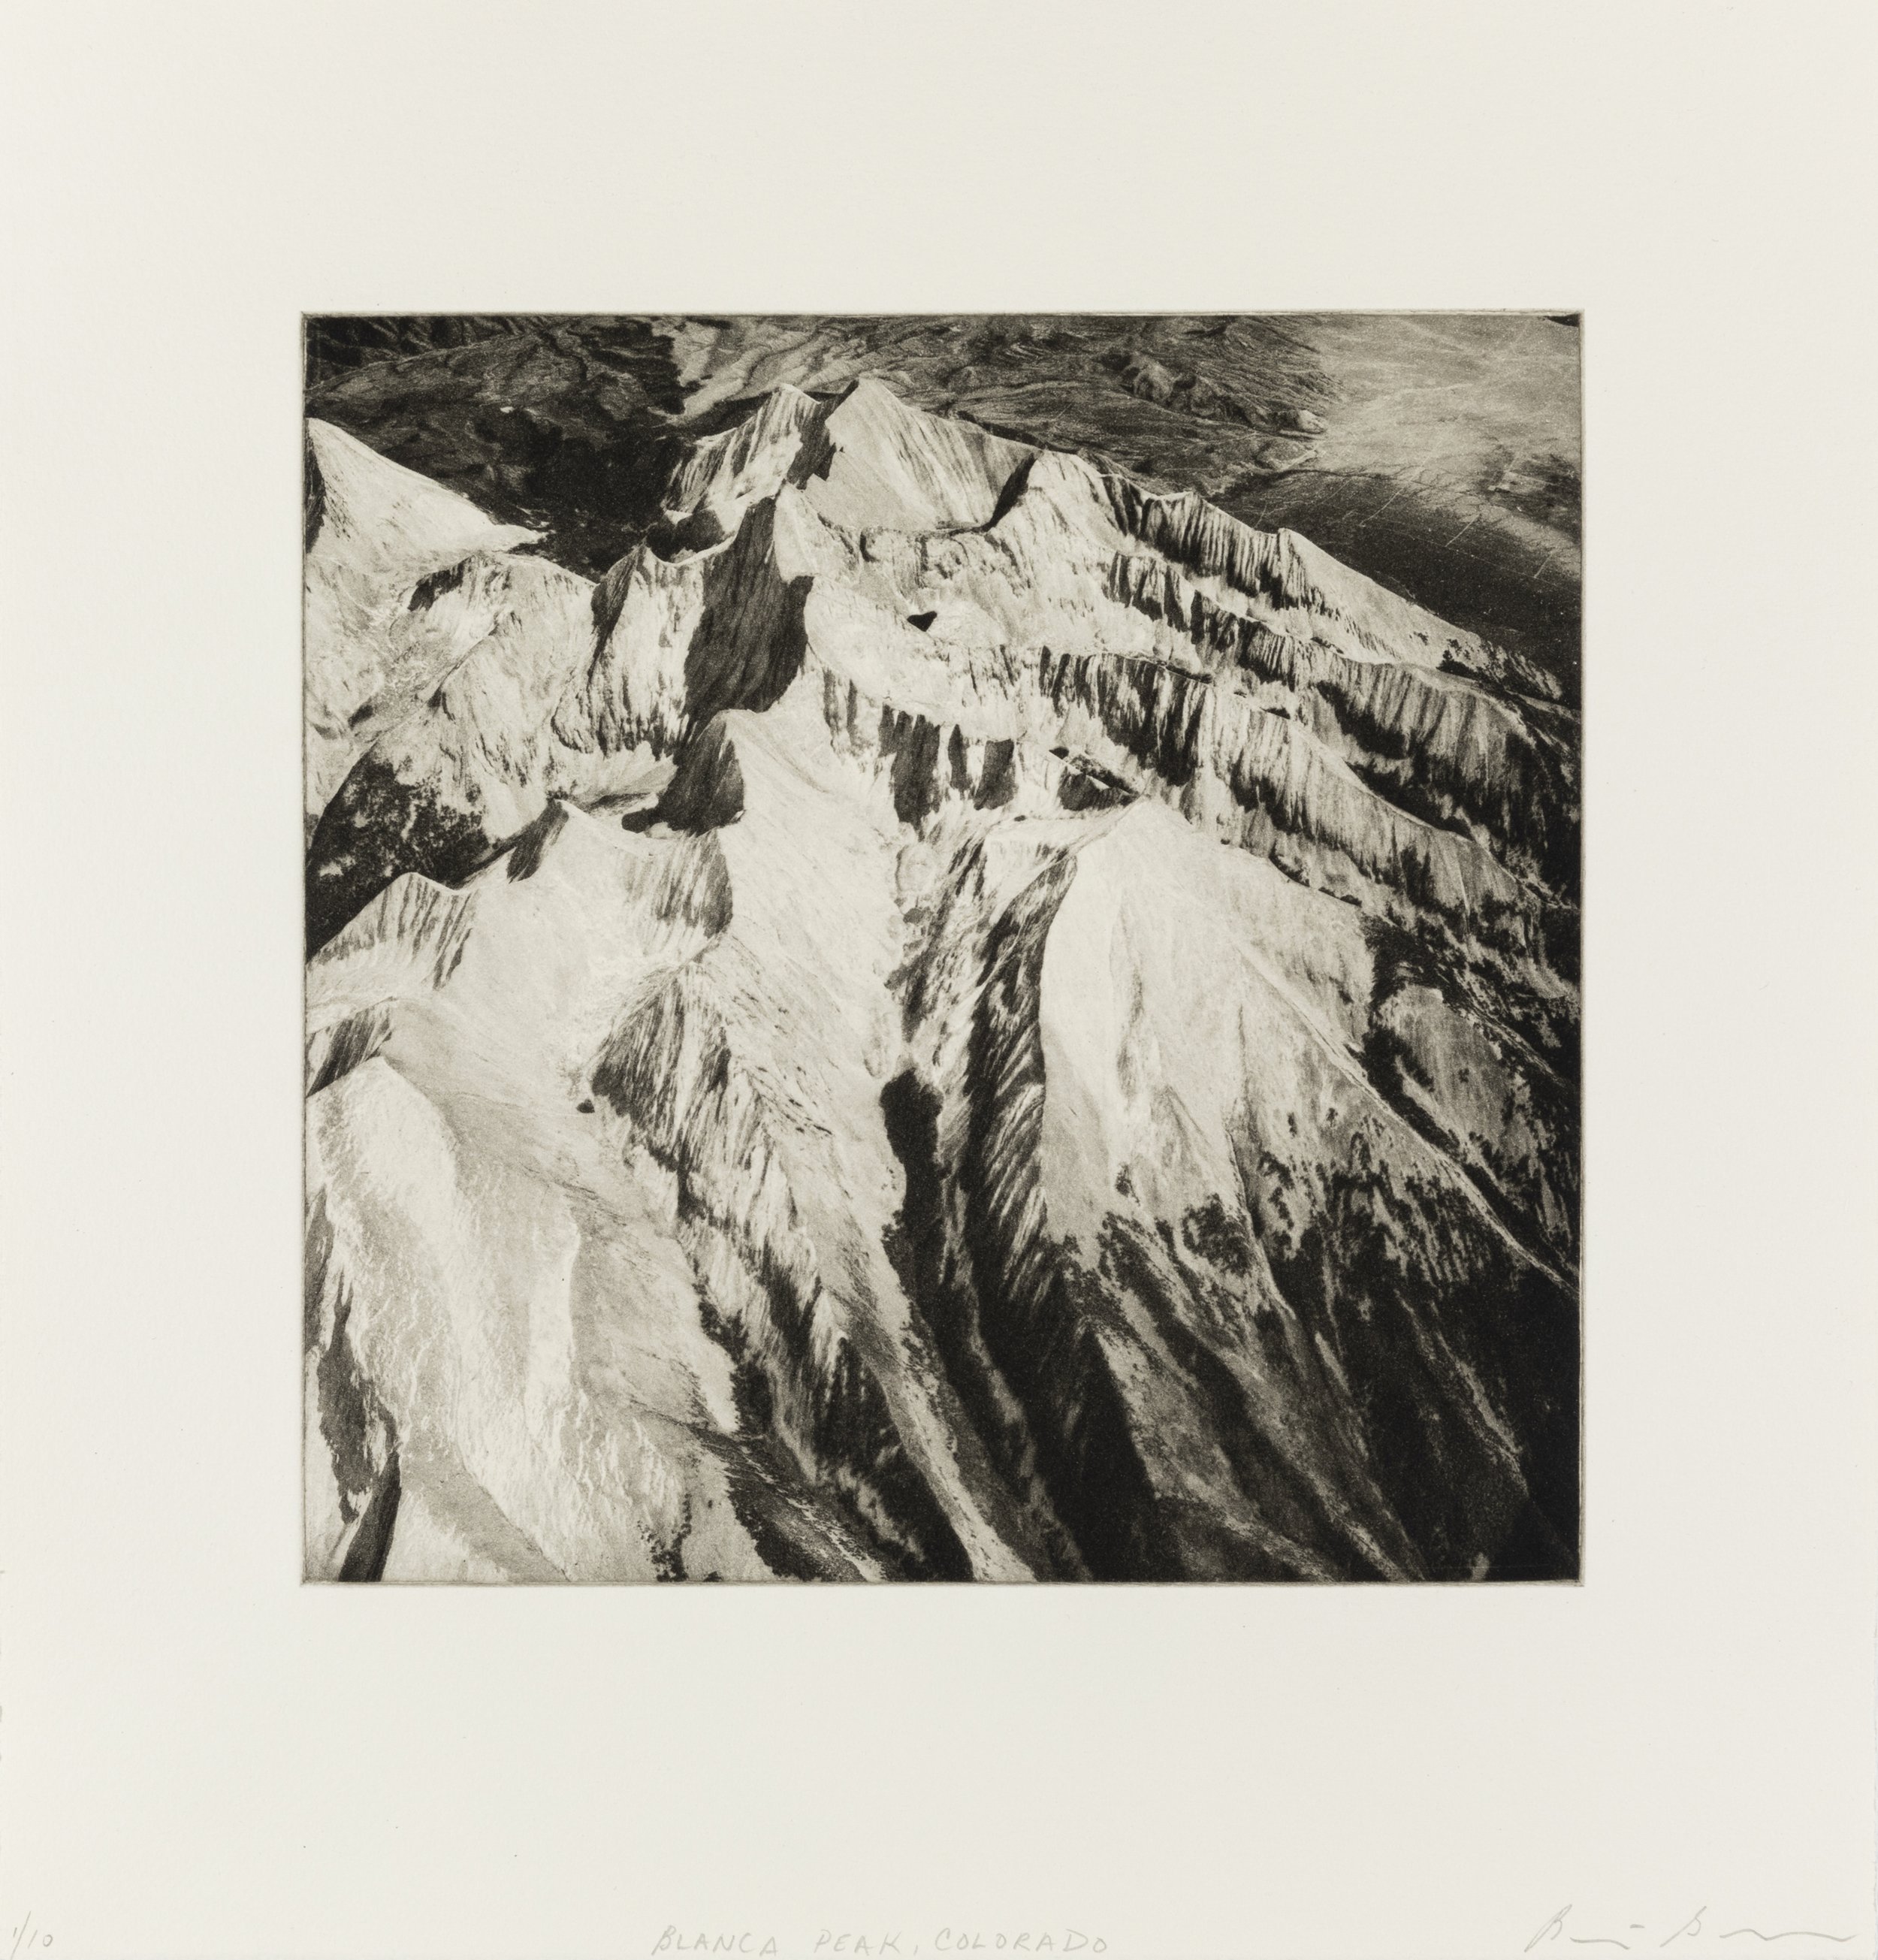    Blanca Peak, Colorado, 2021   Copperplate photogravure etching on cotton rag paper, plate size; 10.6 x 10.6, paper size; 16 x 15.5, edition 10  